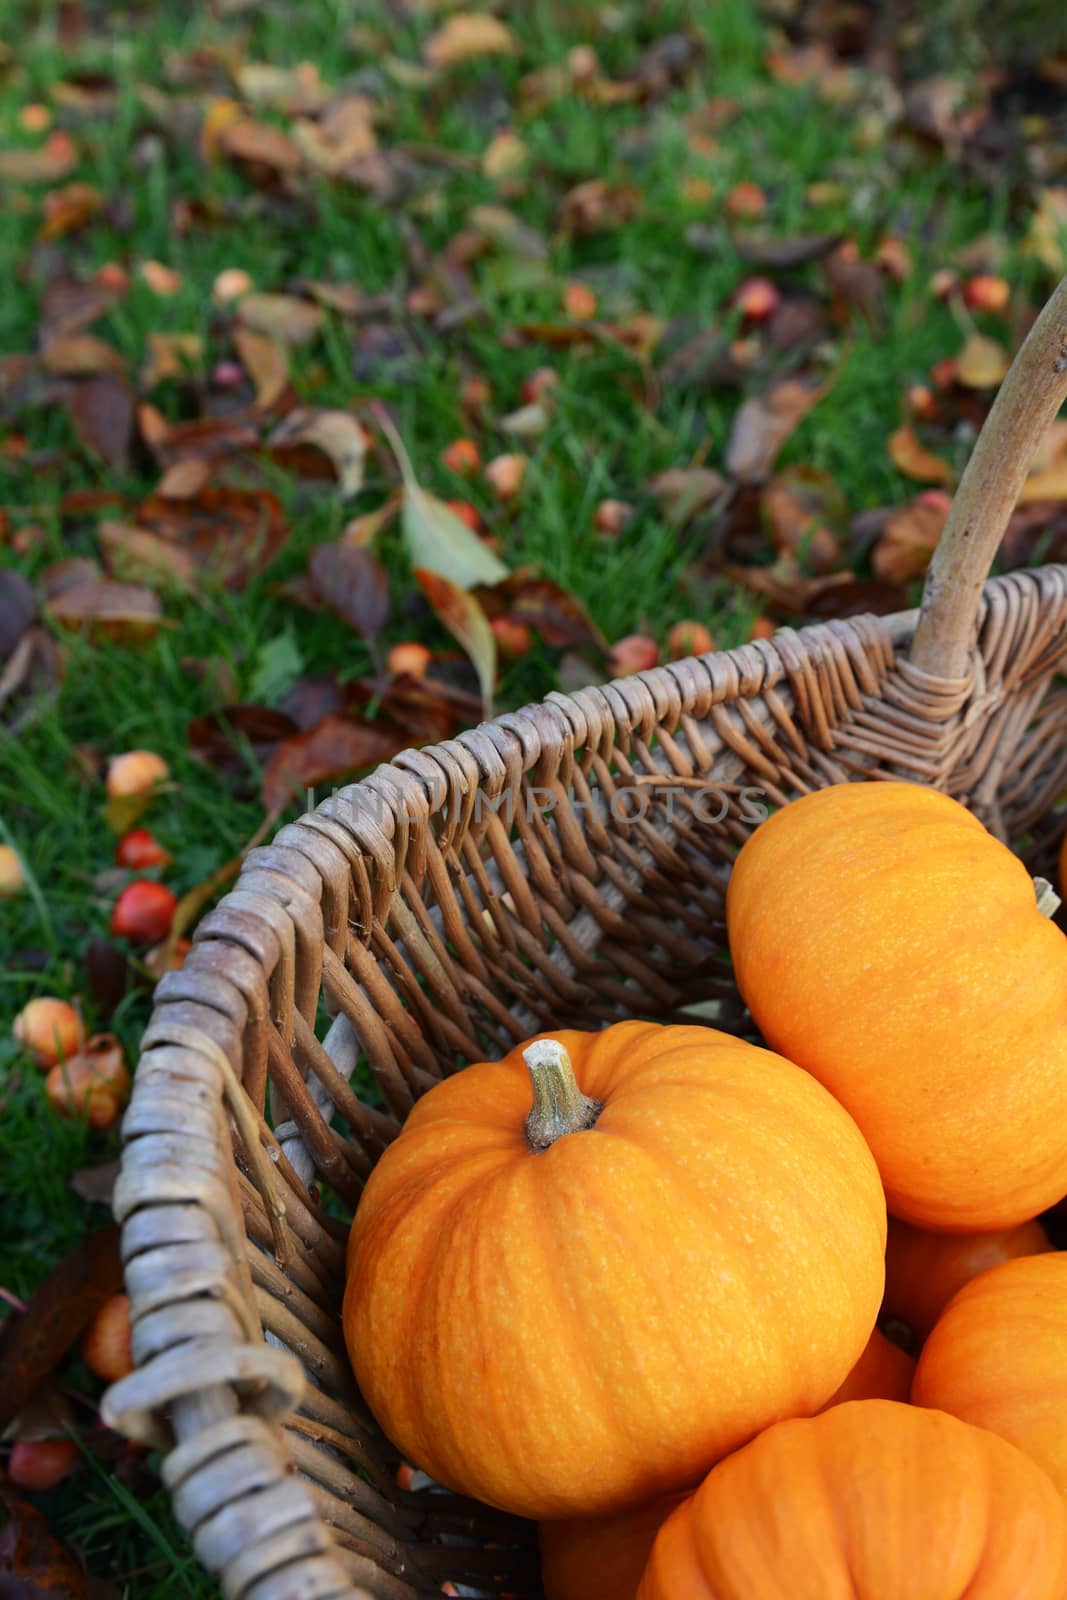 Orange mini pumpkin in selective focus in a rustic woven basket in an autumnal garden covered in leaves and crab apples